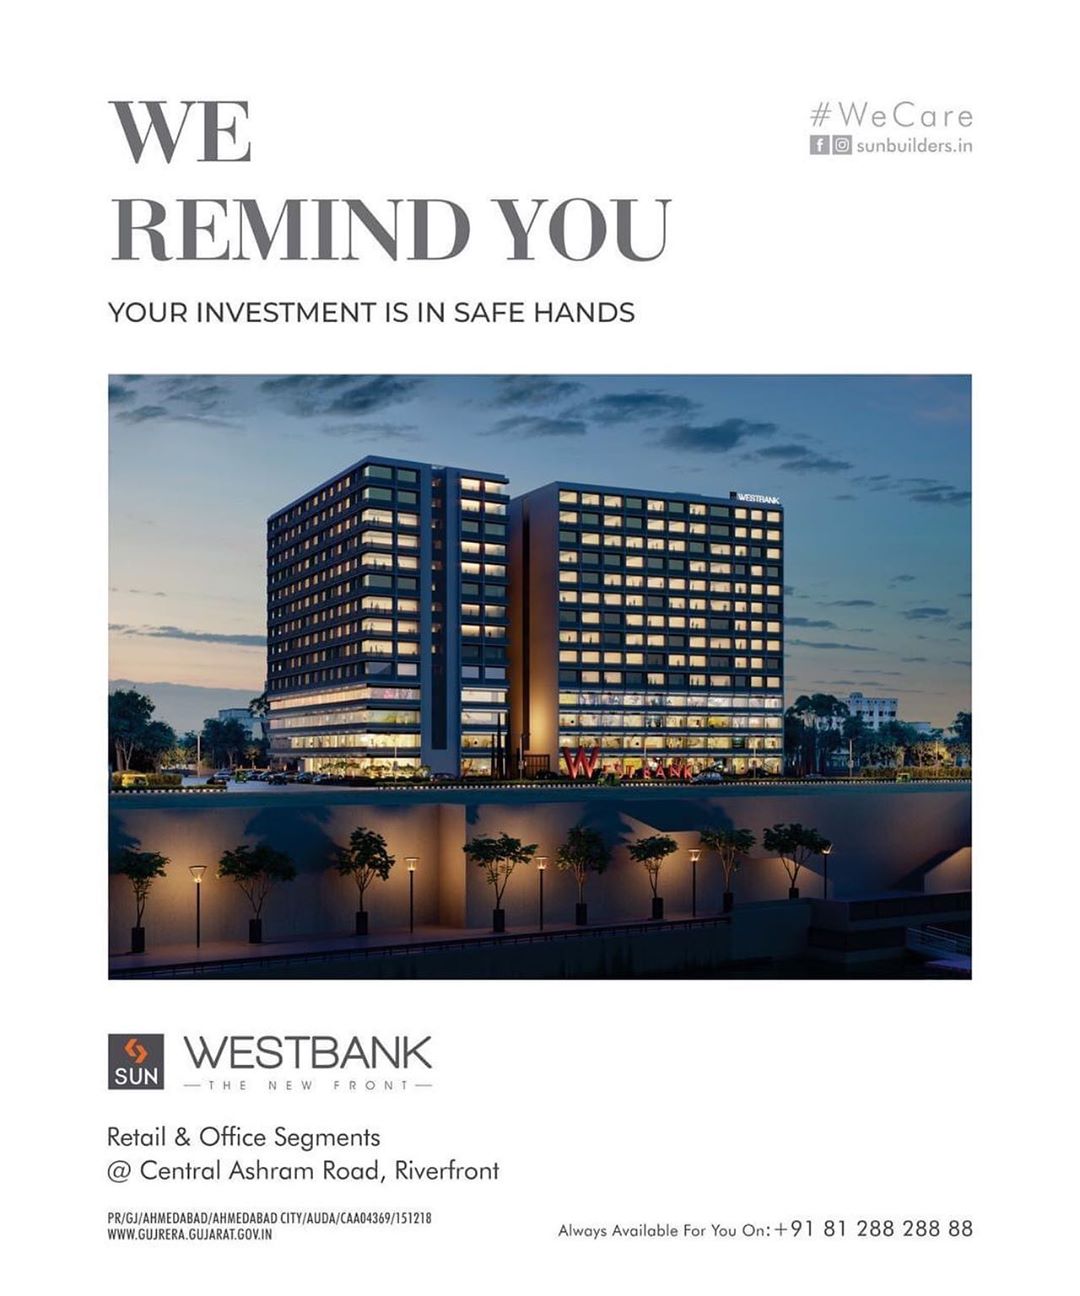 Nearly 4 decades of trust, quality ethical practice and commitment is what you get with us.
.
.
Sun Westbank, a Commercial Commune Centrally located at Ashram Road with Spectacular Riverfront and City Views. Call +91 9978932057

#safeinvestment #qualityconstruction #ethics #realestateahmedabad #sunbuildersgroup #staysafe #stayhealthy #sunwestbank #ahmedabad #gujarat #realestate #wecare